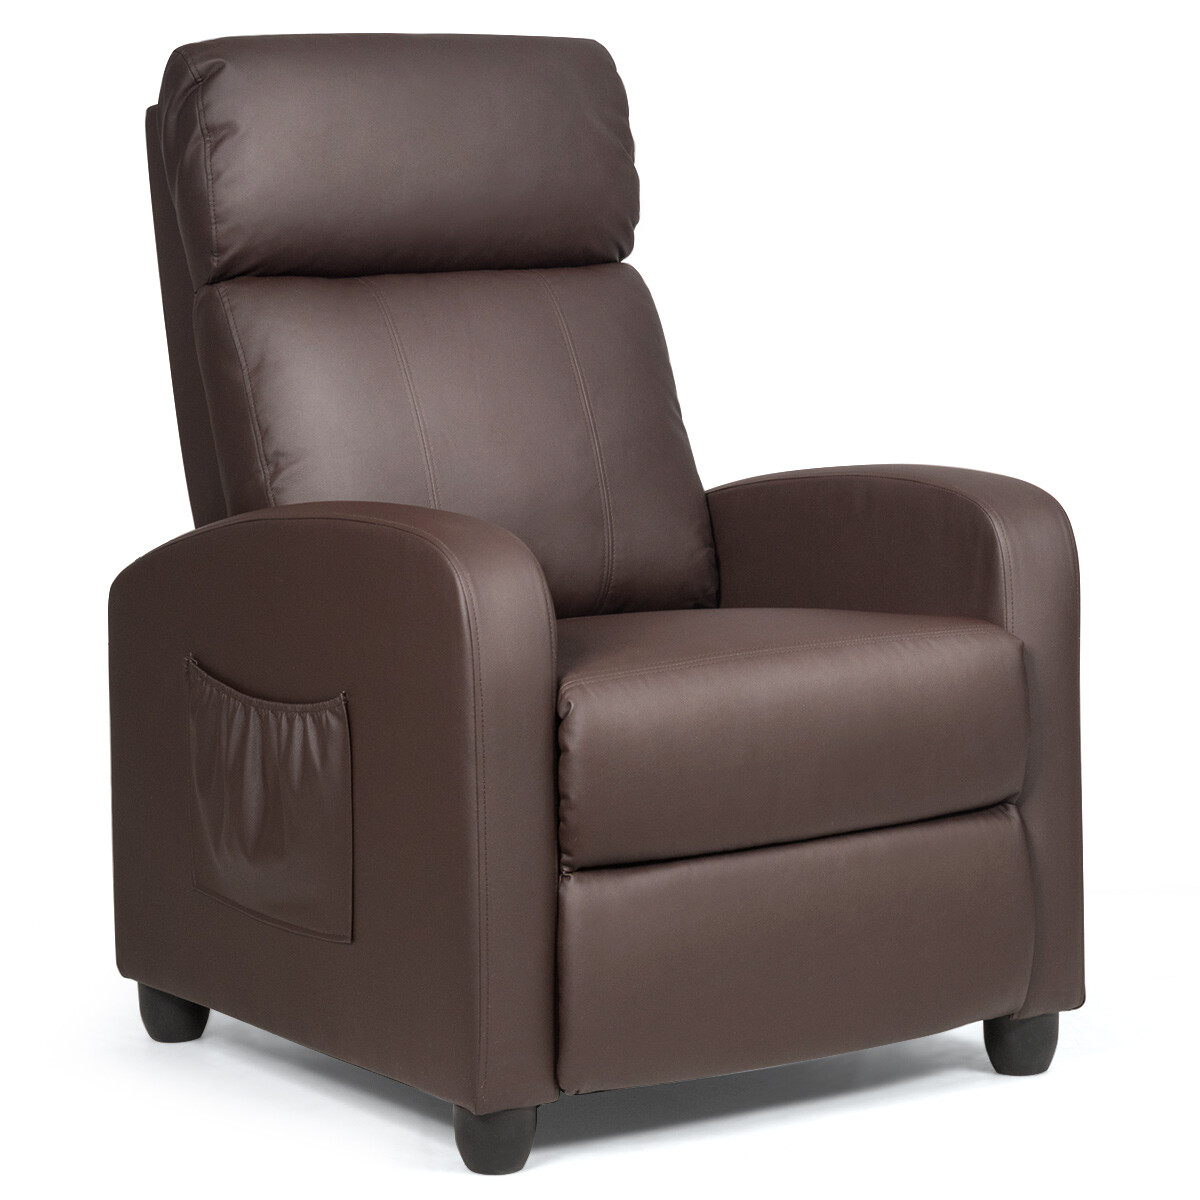 Recliner Sofa Wingback Chair with Massage Function-Brown - Color: Brown